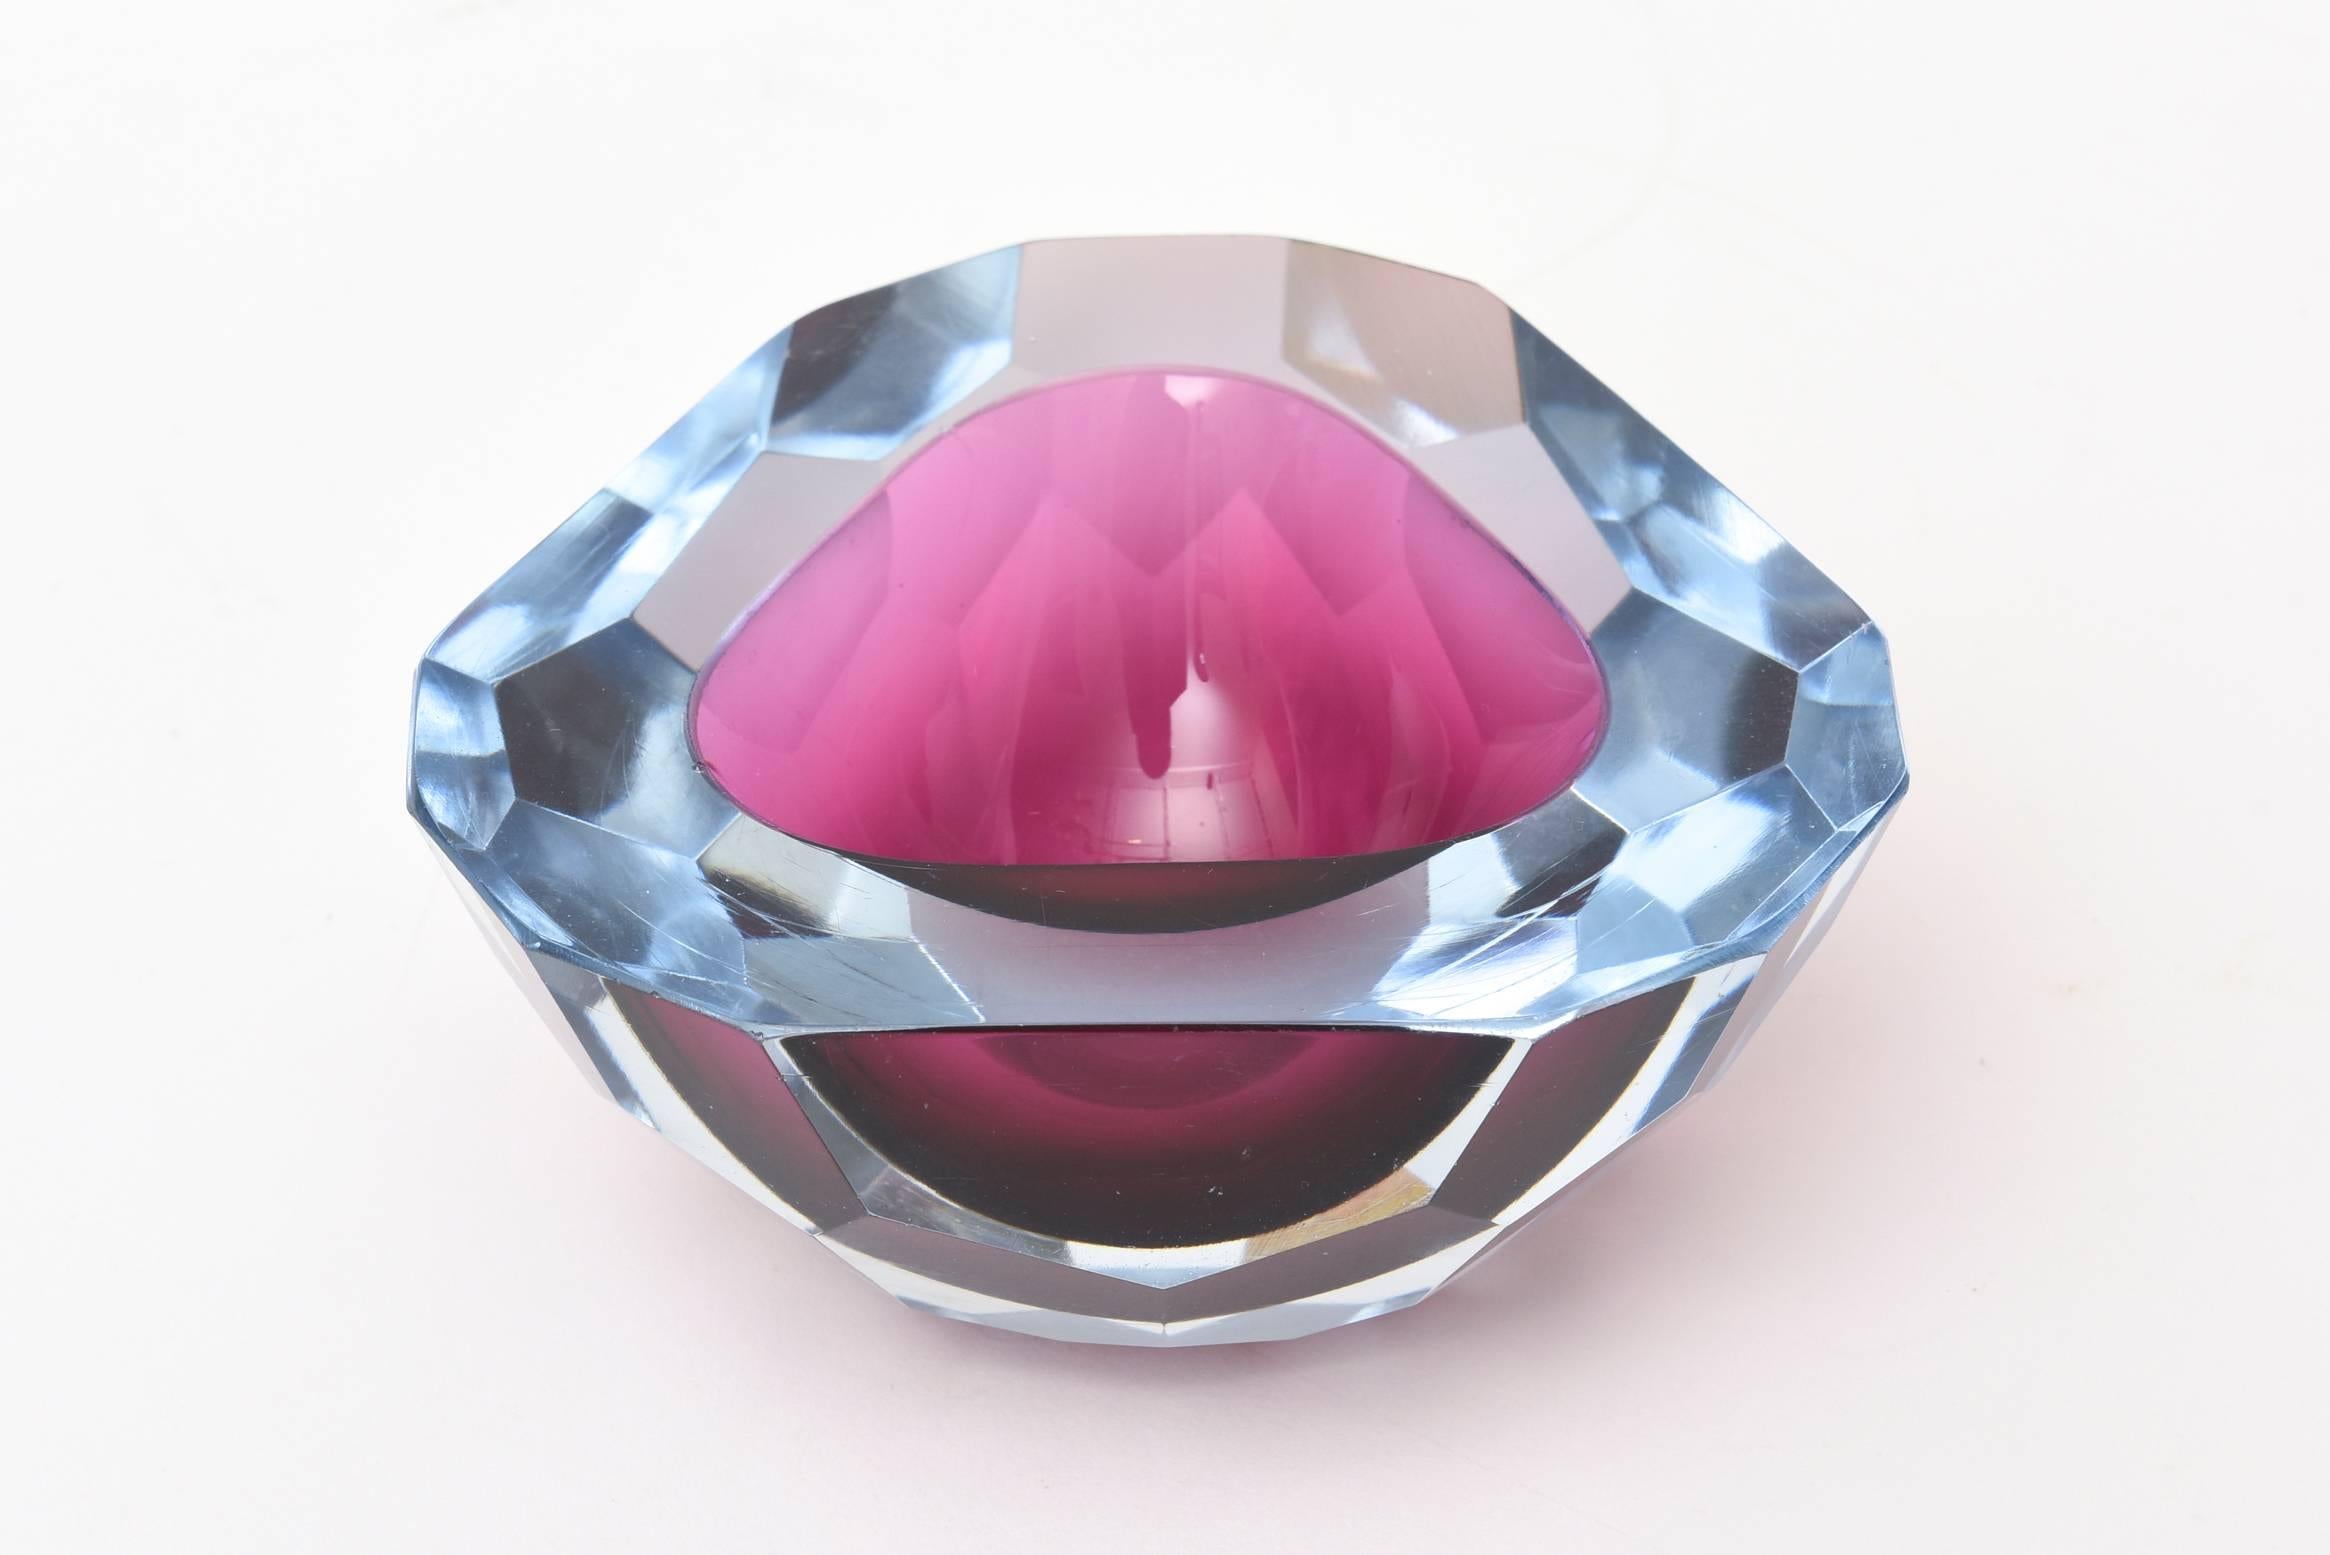 This stunning combination of brilliant and luscious colors of magenta raspberry pink and blue make up this Italian murano geode bowl with a flat cut polished top. it has chiseled diamond faceted sides that look like a honeycomb pattern. It has been